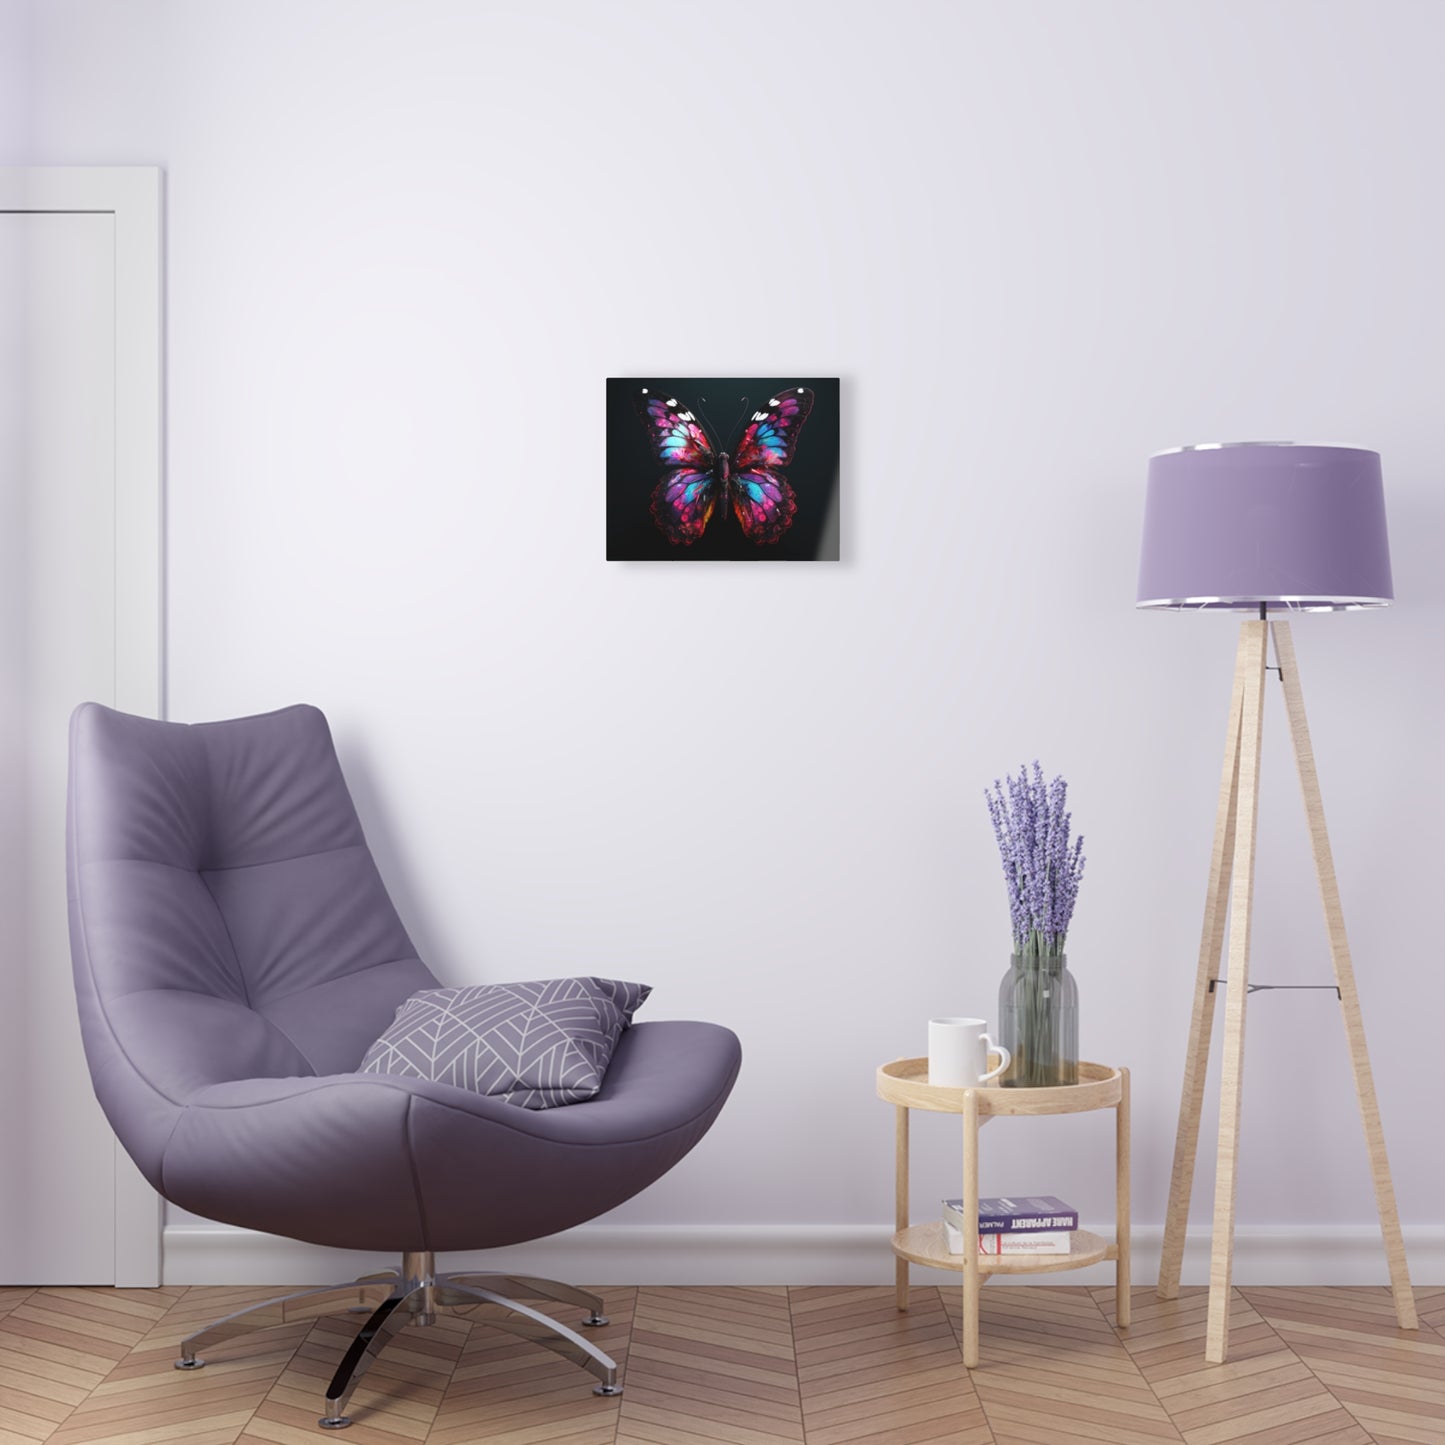 Acrylic Prints Hyper Butterfly Real